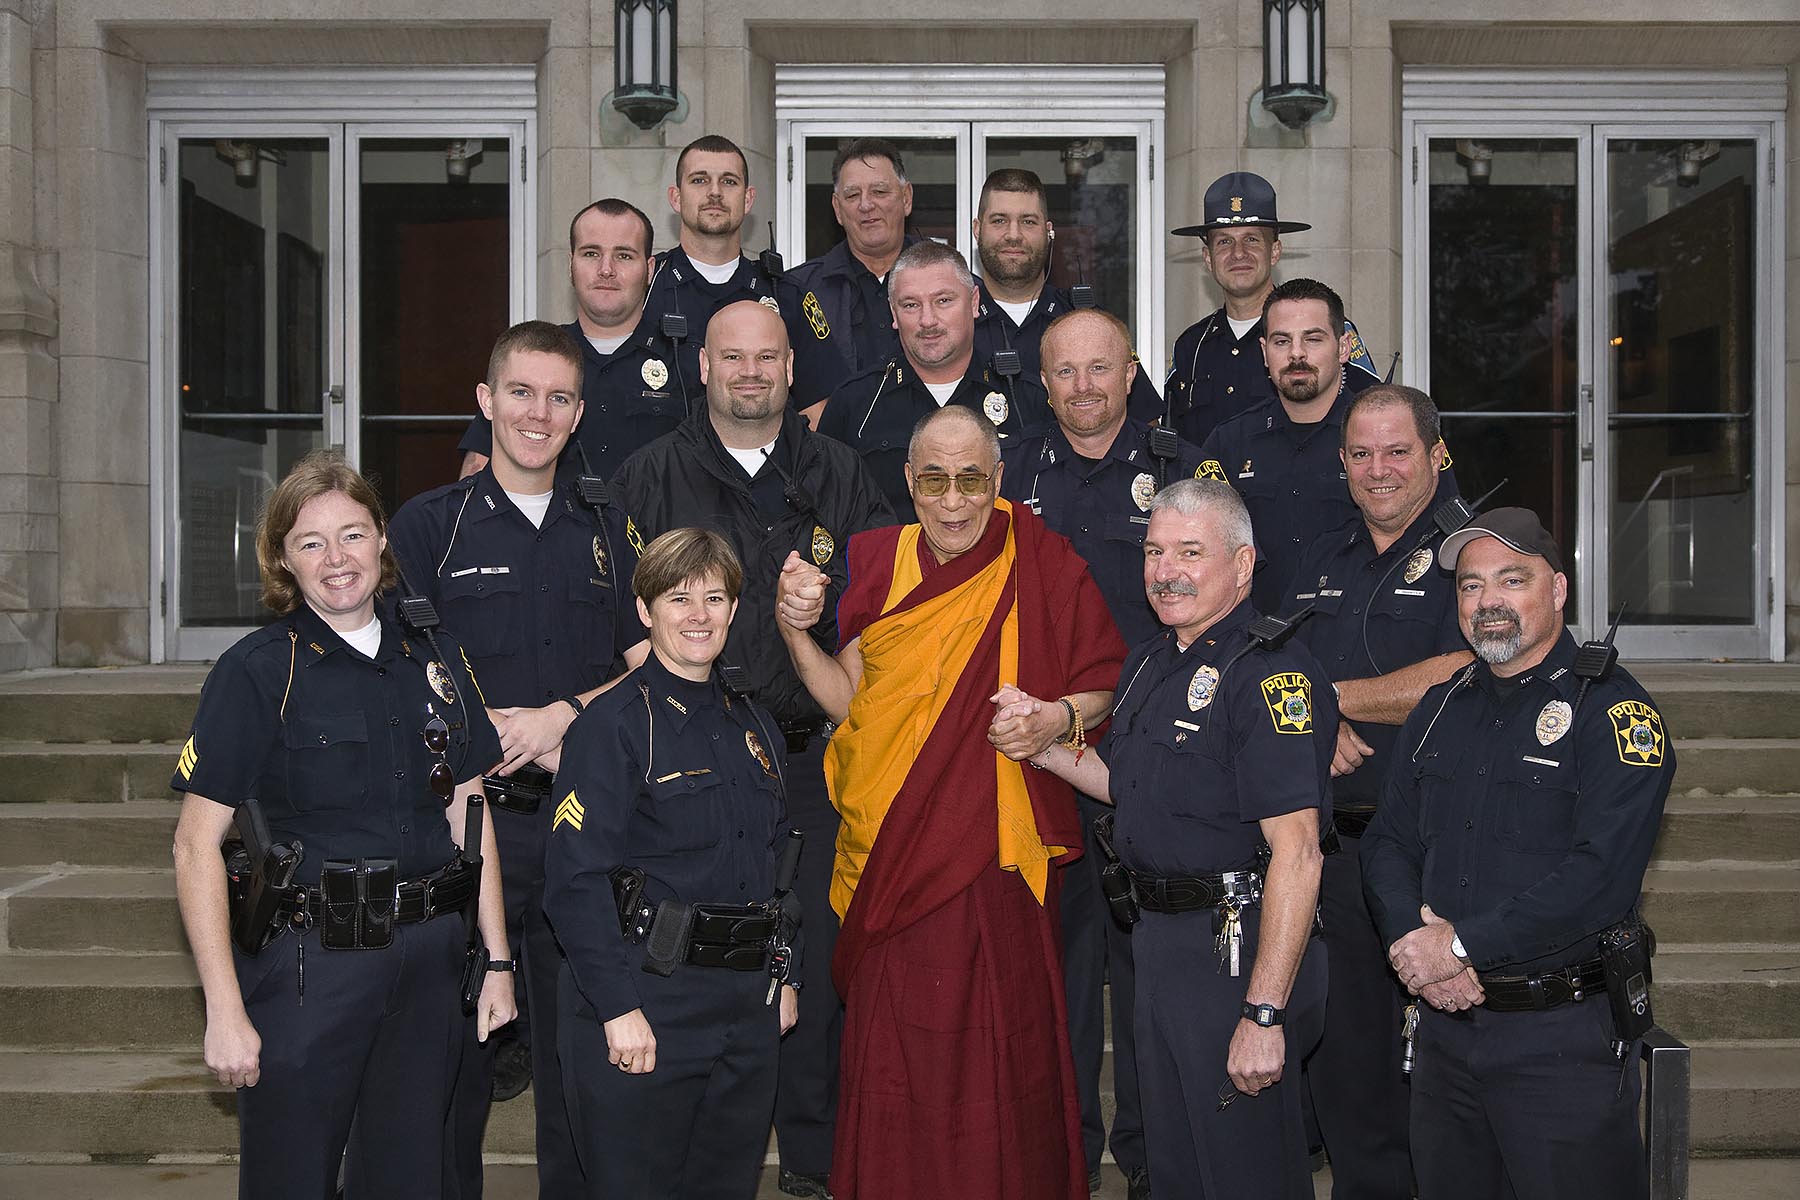 The 14th DALAI LAMA with with the local POLICE DEPARTMENT - BLOOMINGTON, INDIANA